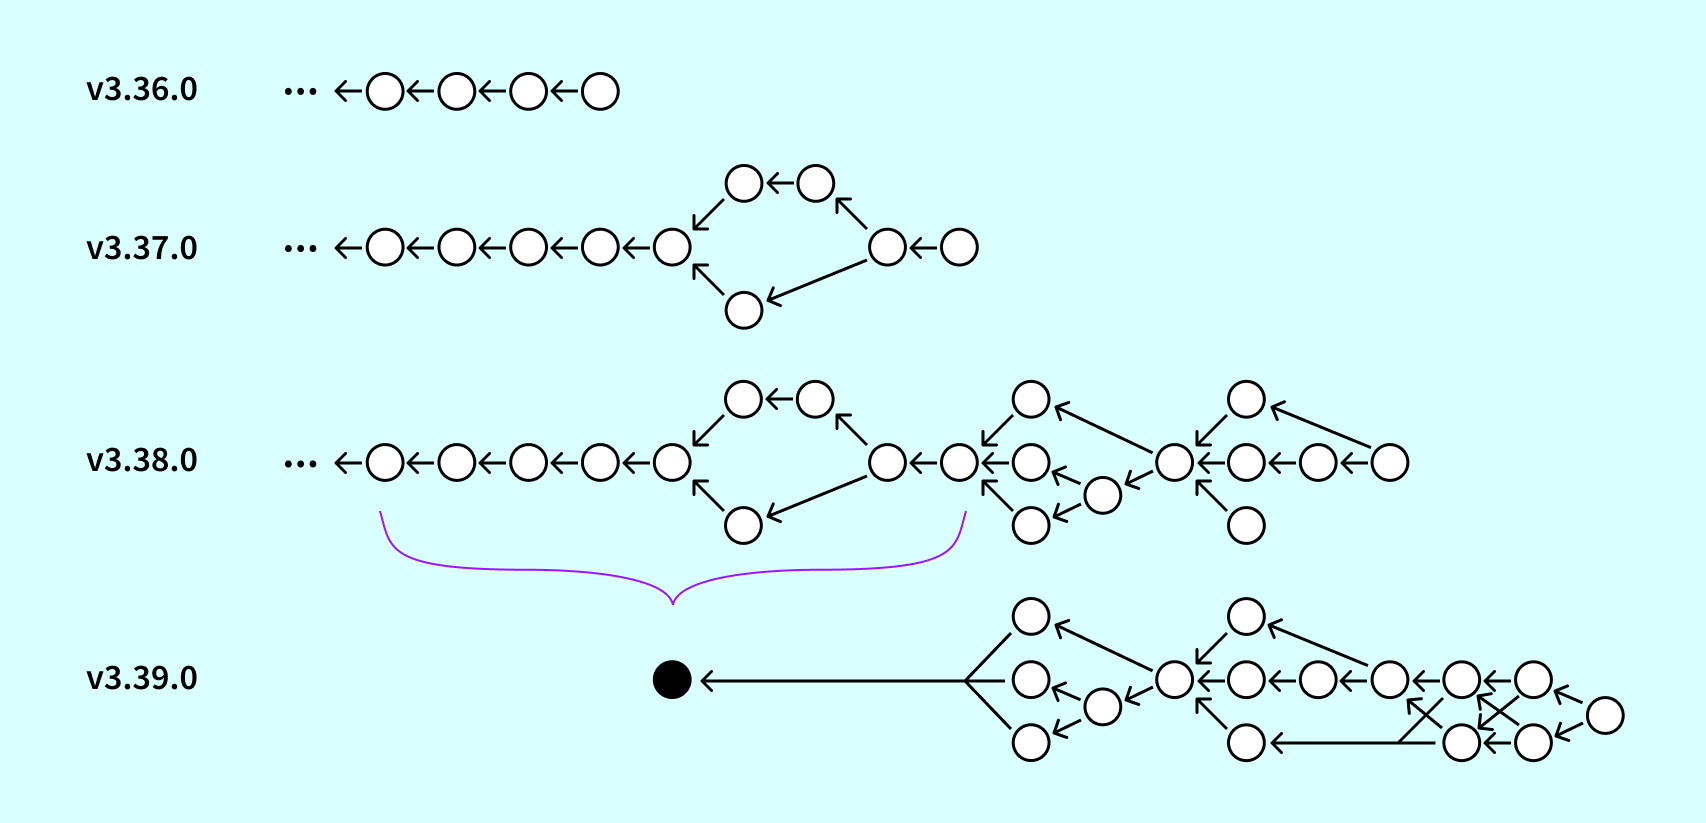 How migration graph structures change release after release.